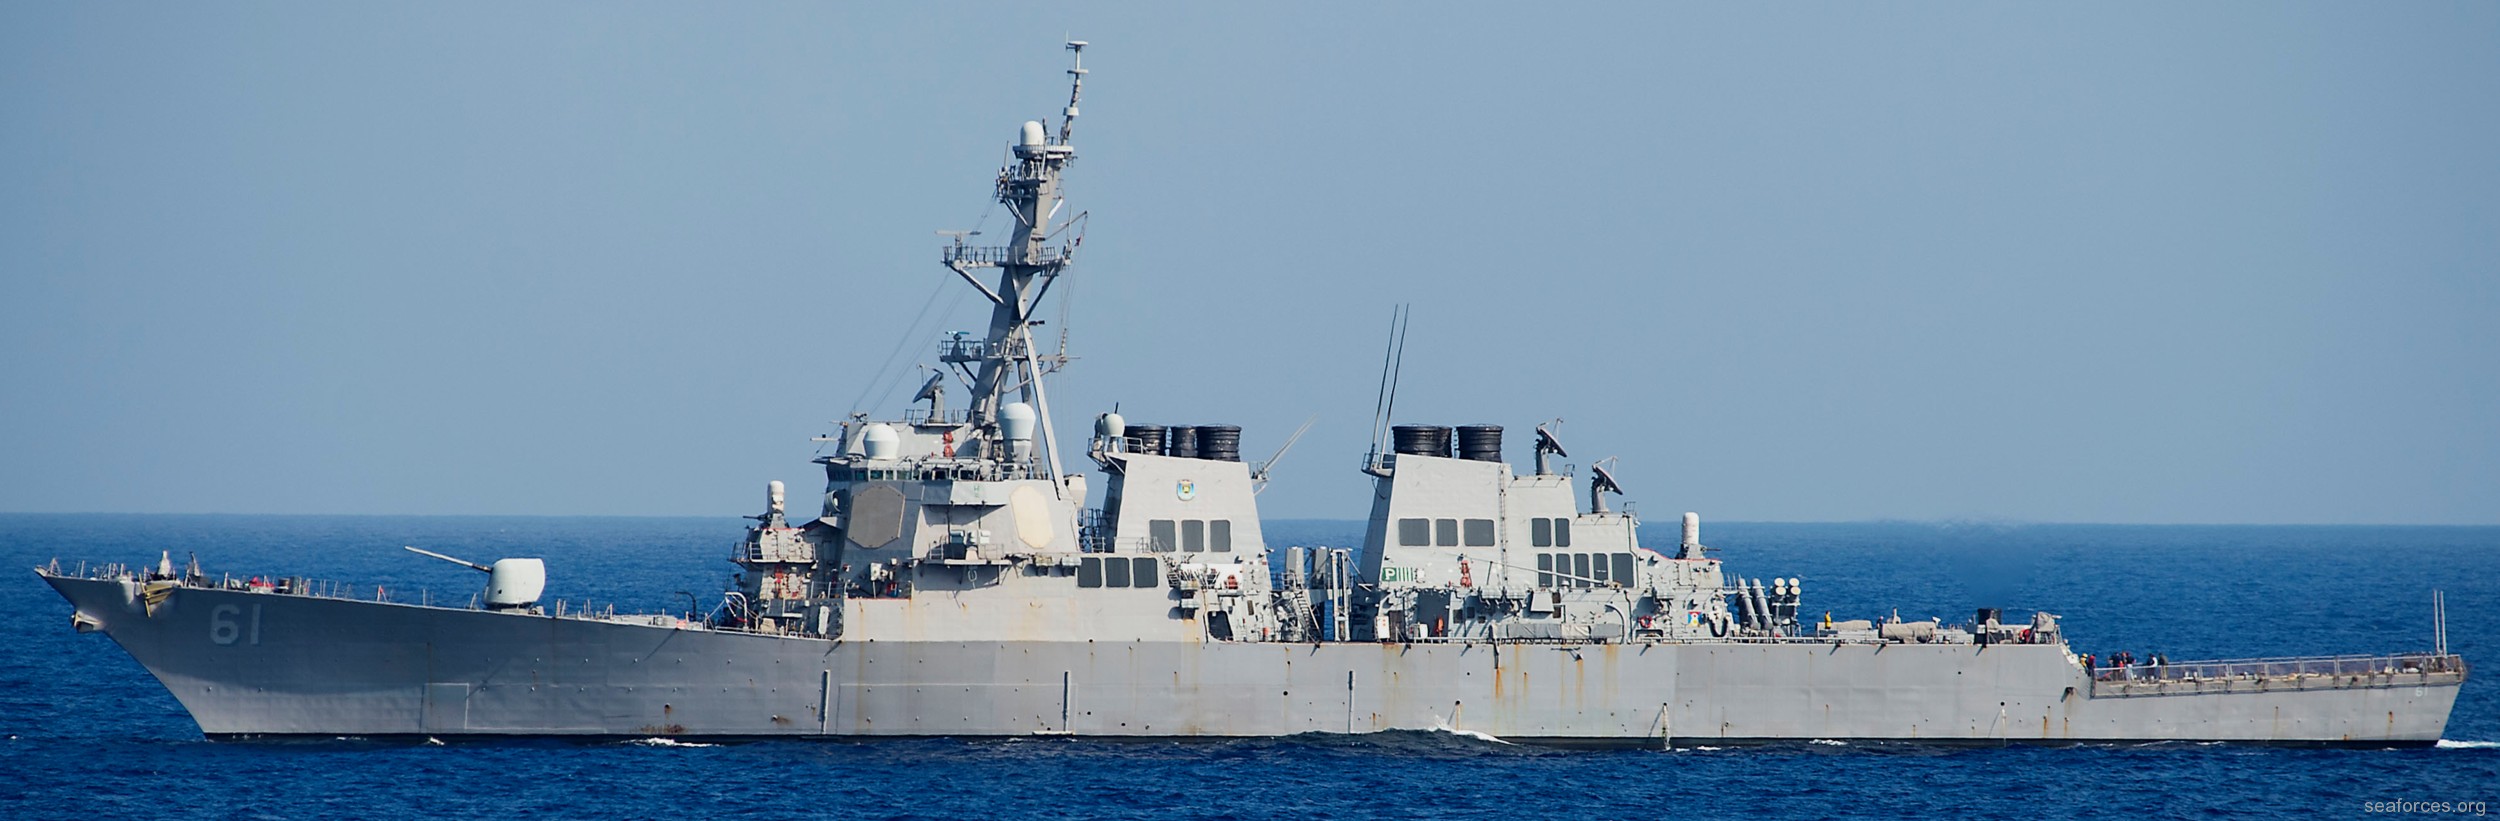 ddg-61 uss ramage guided missile destroyer us navy 34